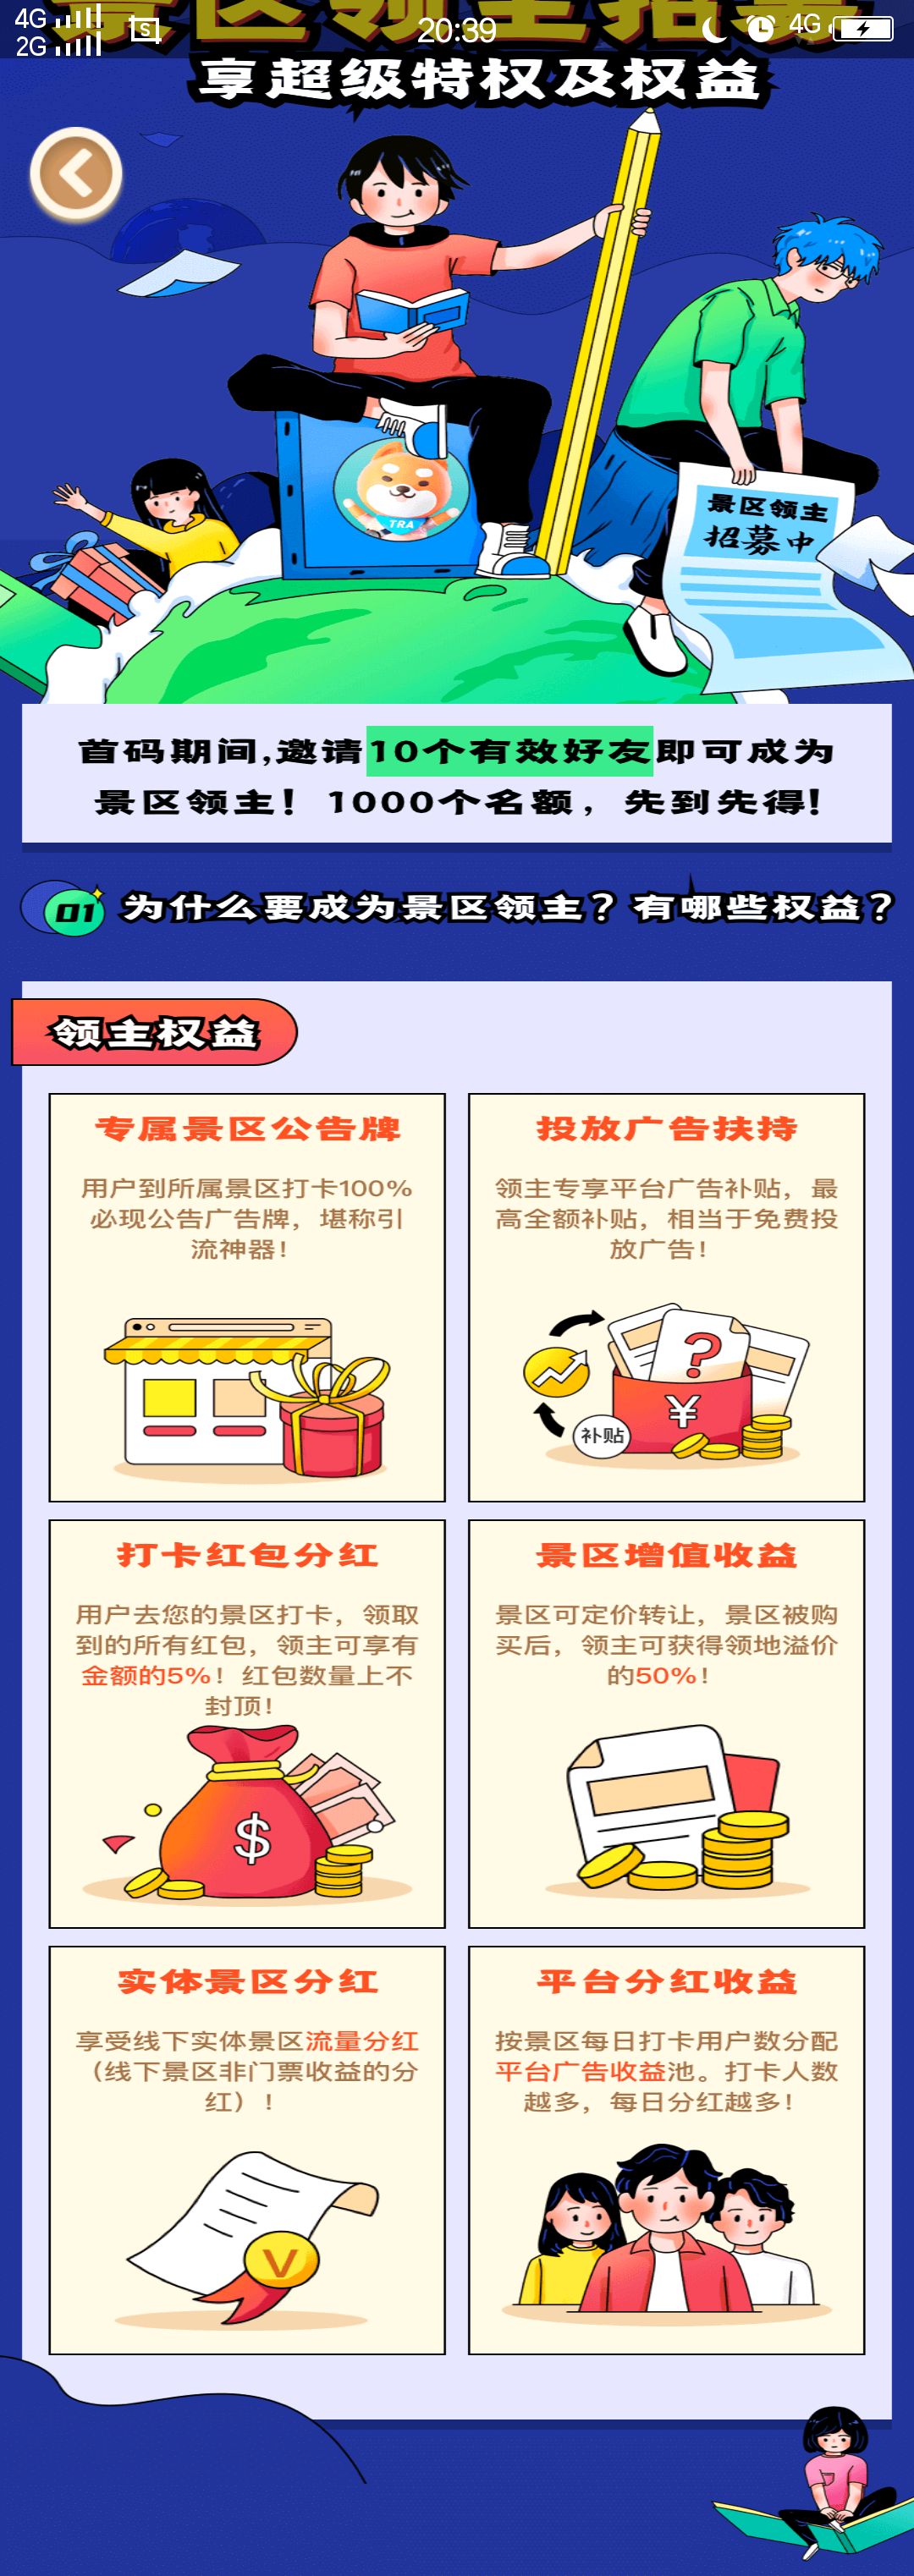 V信图片_20210529111516.png